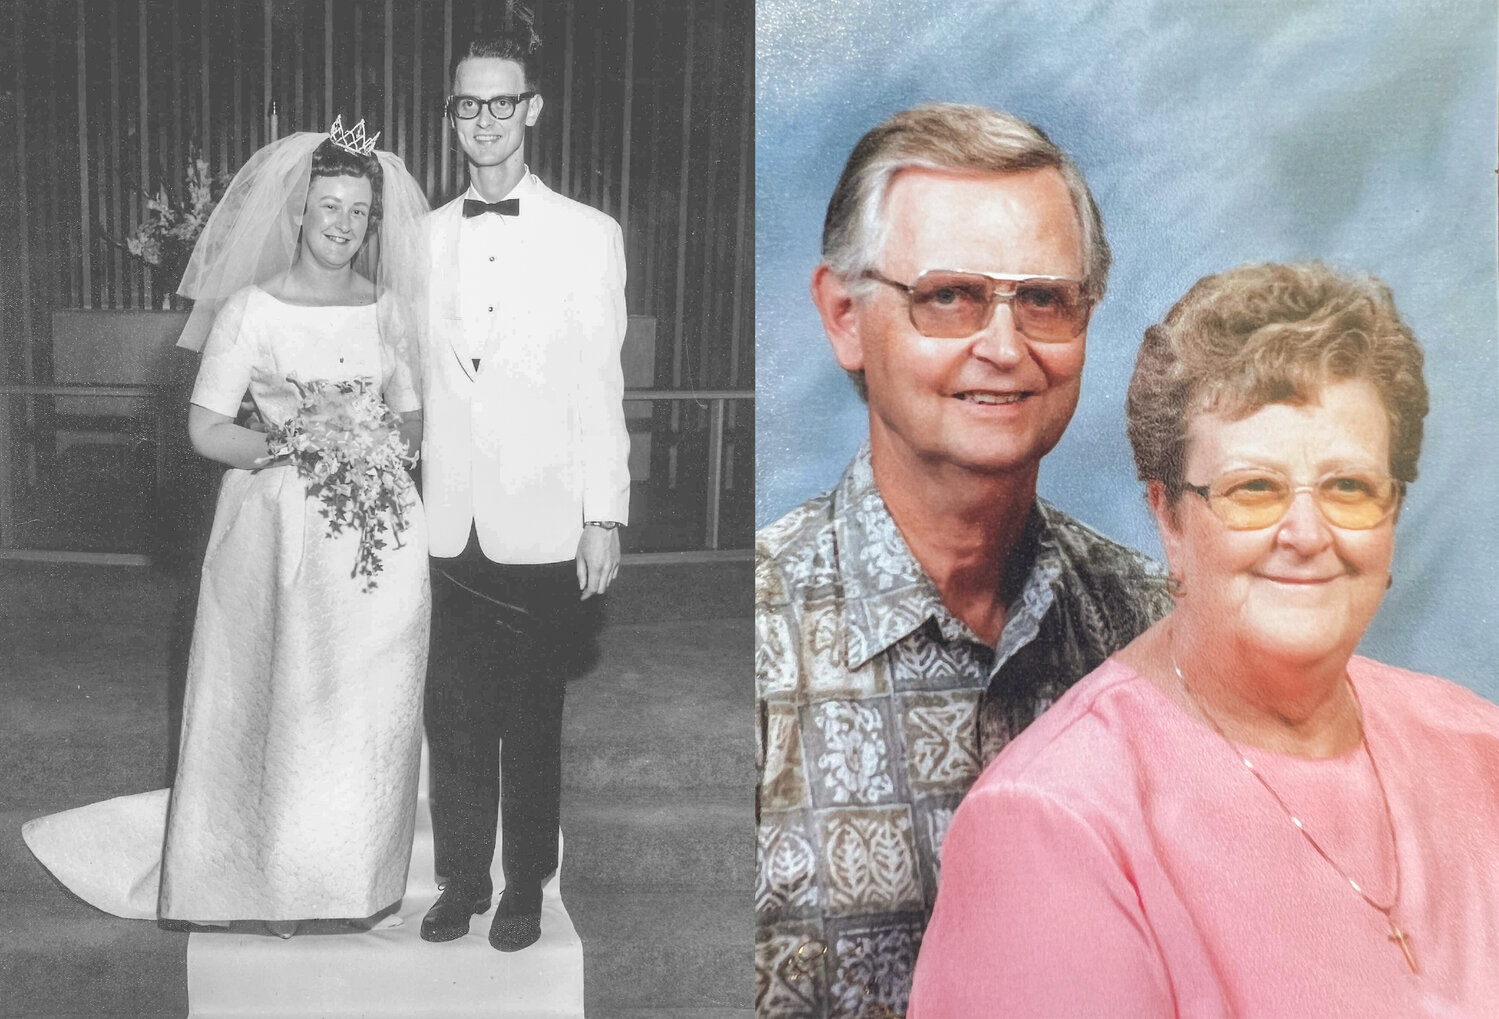 Centralia couple Gary and Kay Odegaard celebrate their 60th wedding anniversary this week on Thursday, June 8.